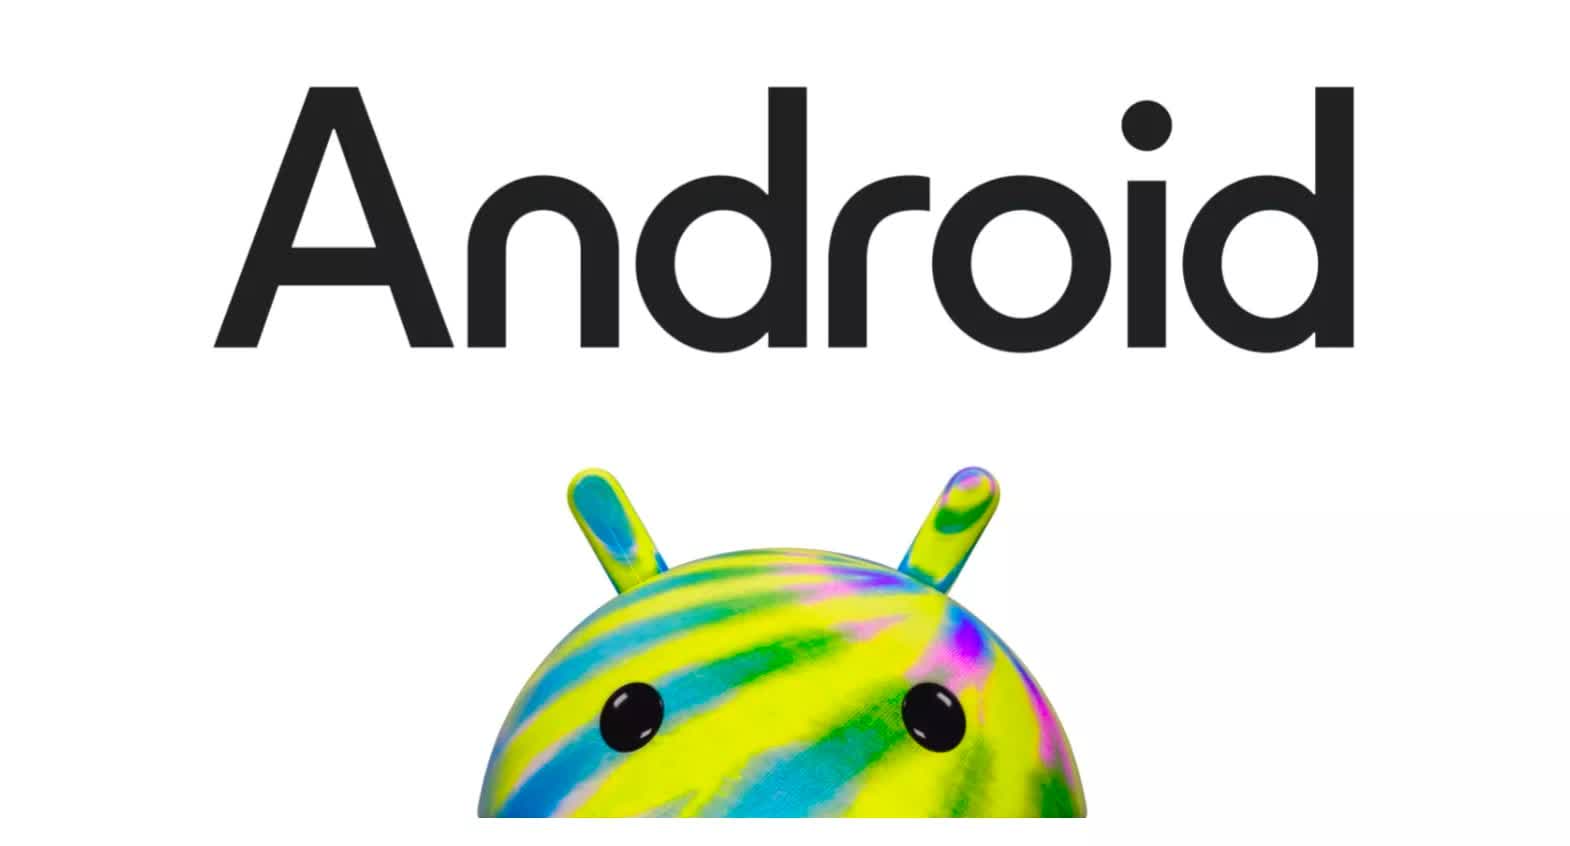 Google gives Android a makeover with updated logo and alternative bugdroids